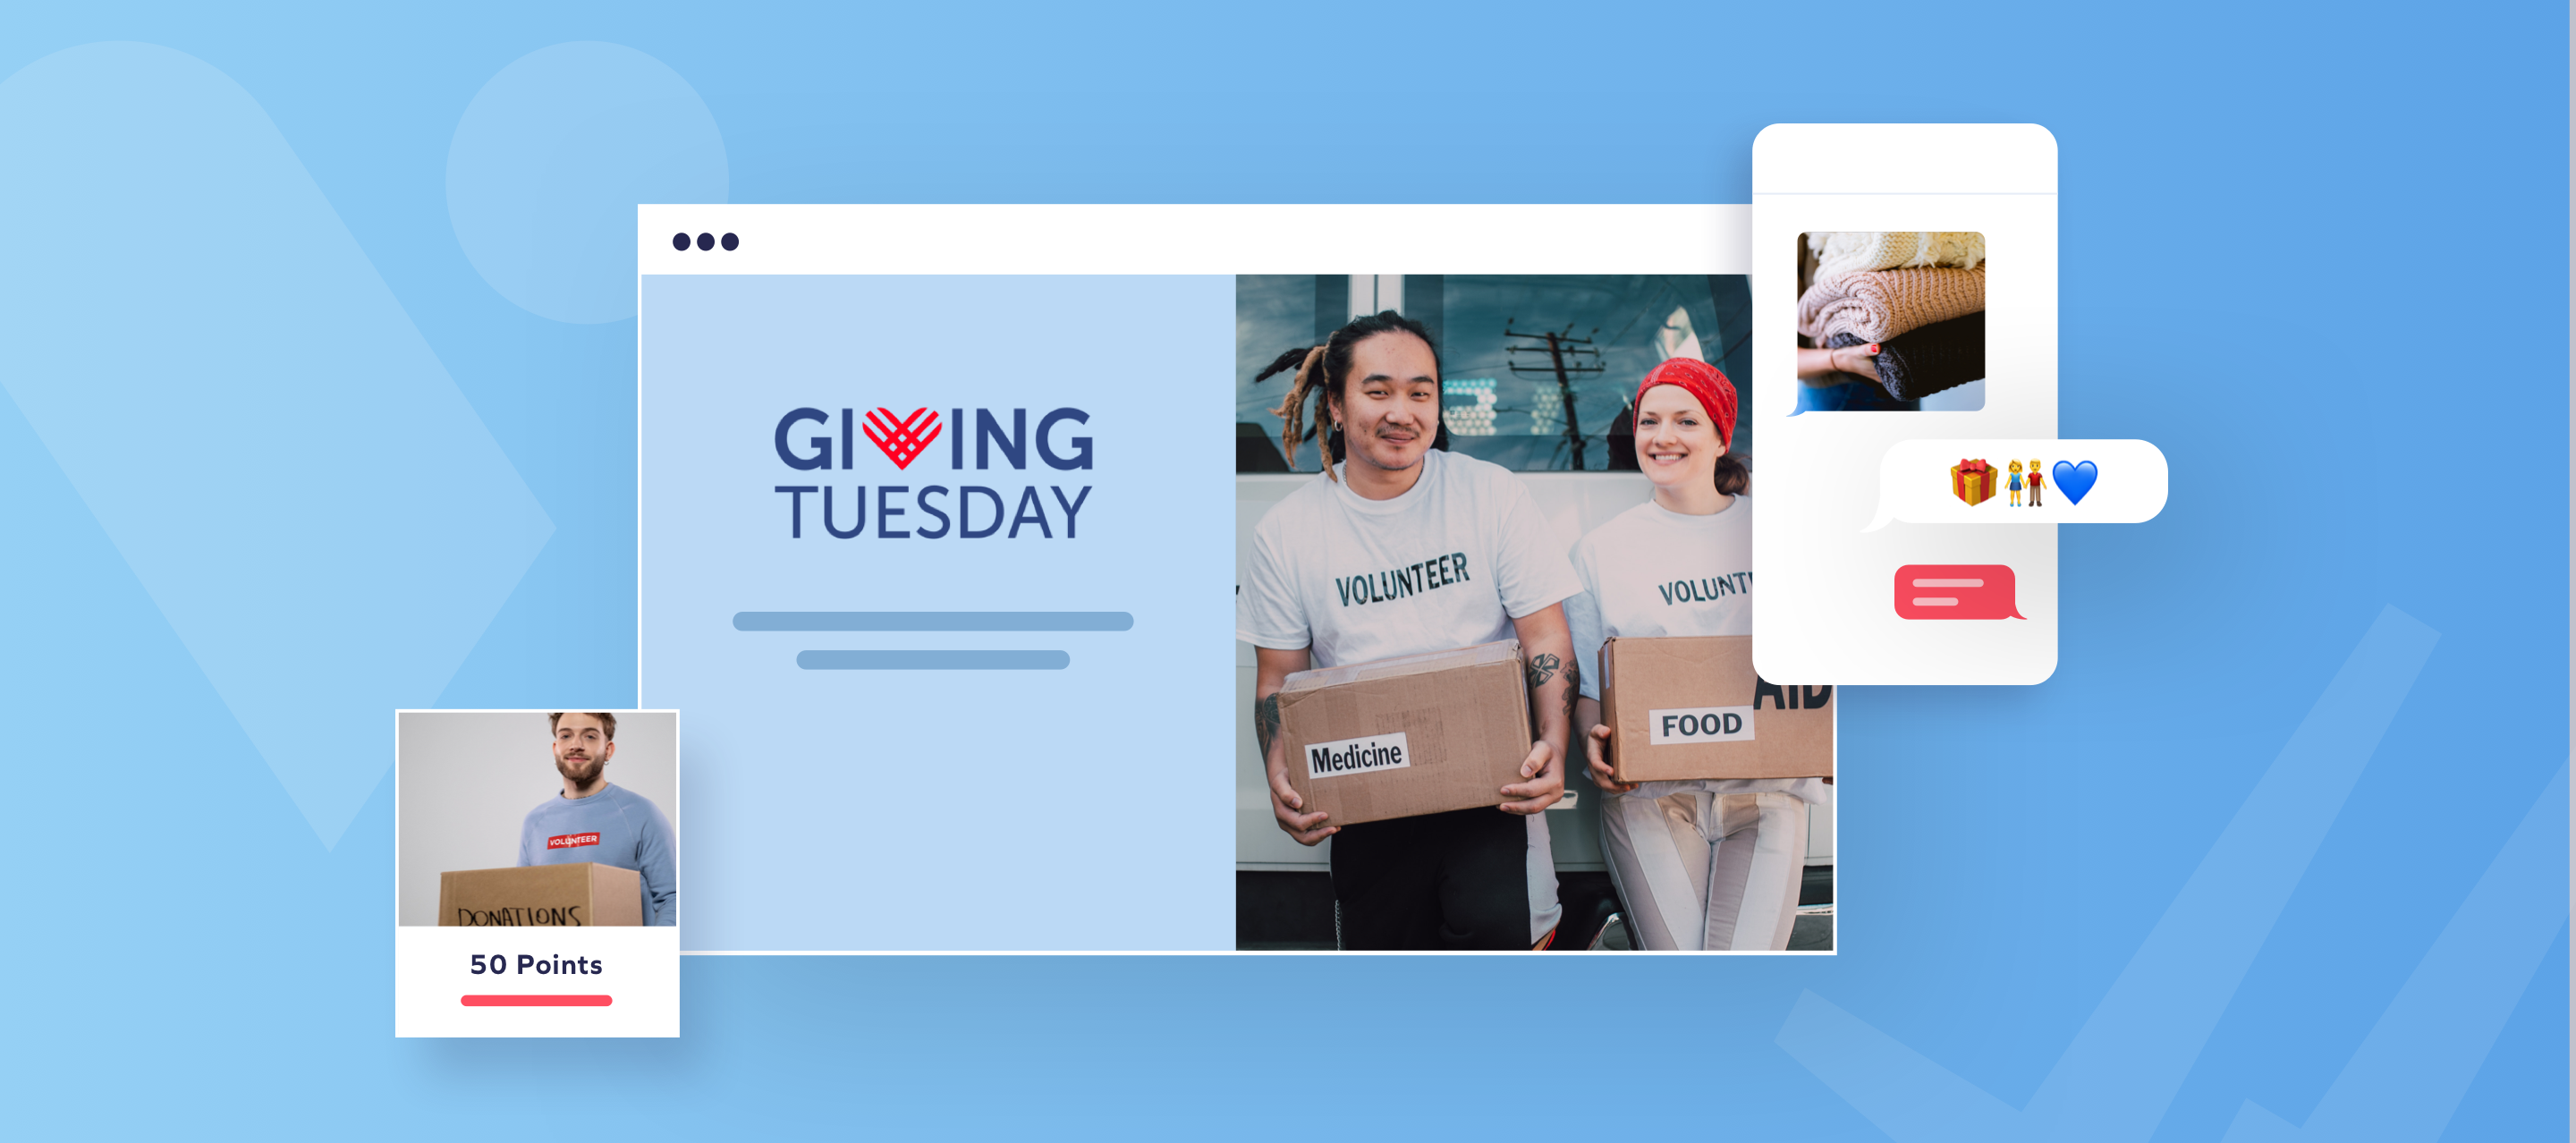 How to leverage Giving Tuesday in your eCommerce marketing strategy 💝